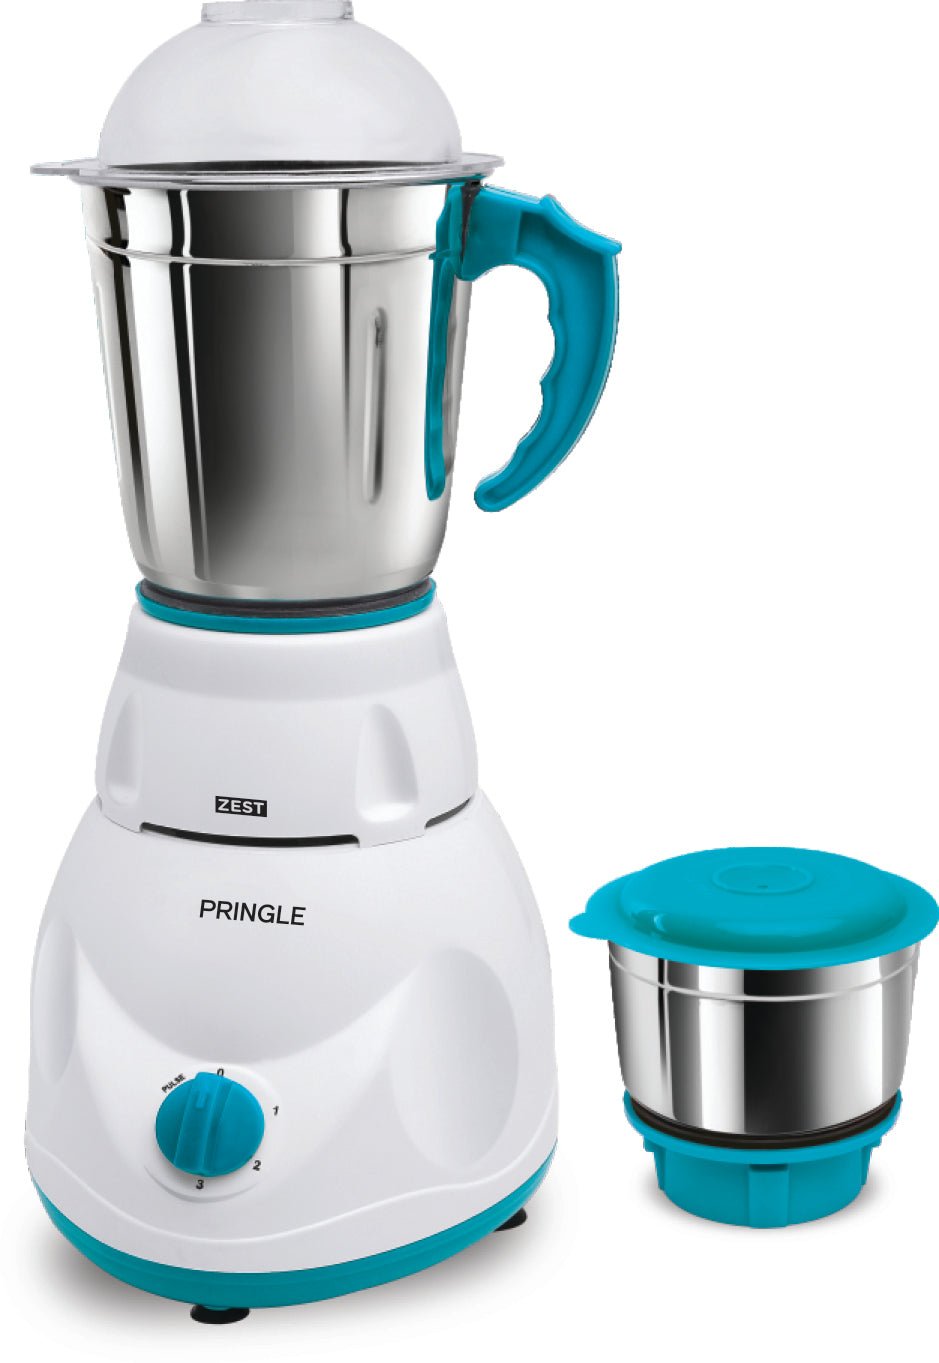 Pringle 550Watt Mixer Grinder with 2 Leak Proof Stainless Steel Jars| 30 Min Motor Rating| Robust Nylon Coupler | Overload Protection| ISI Certified| 2 Year Warranty - Pringle Appliances